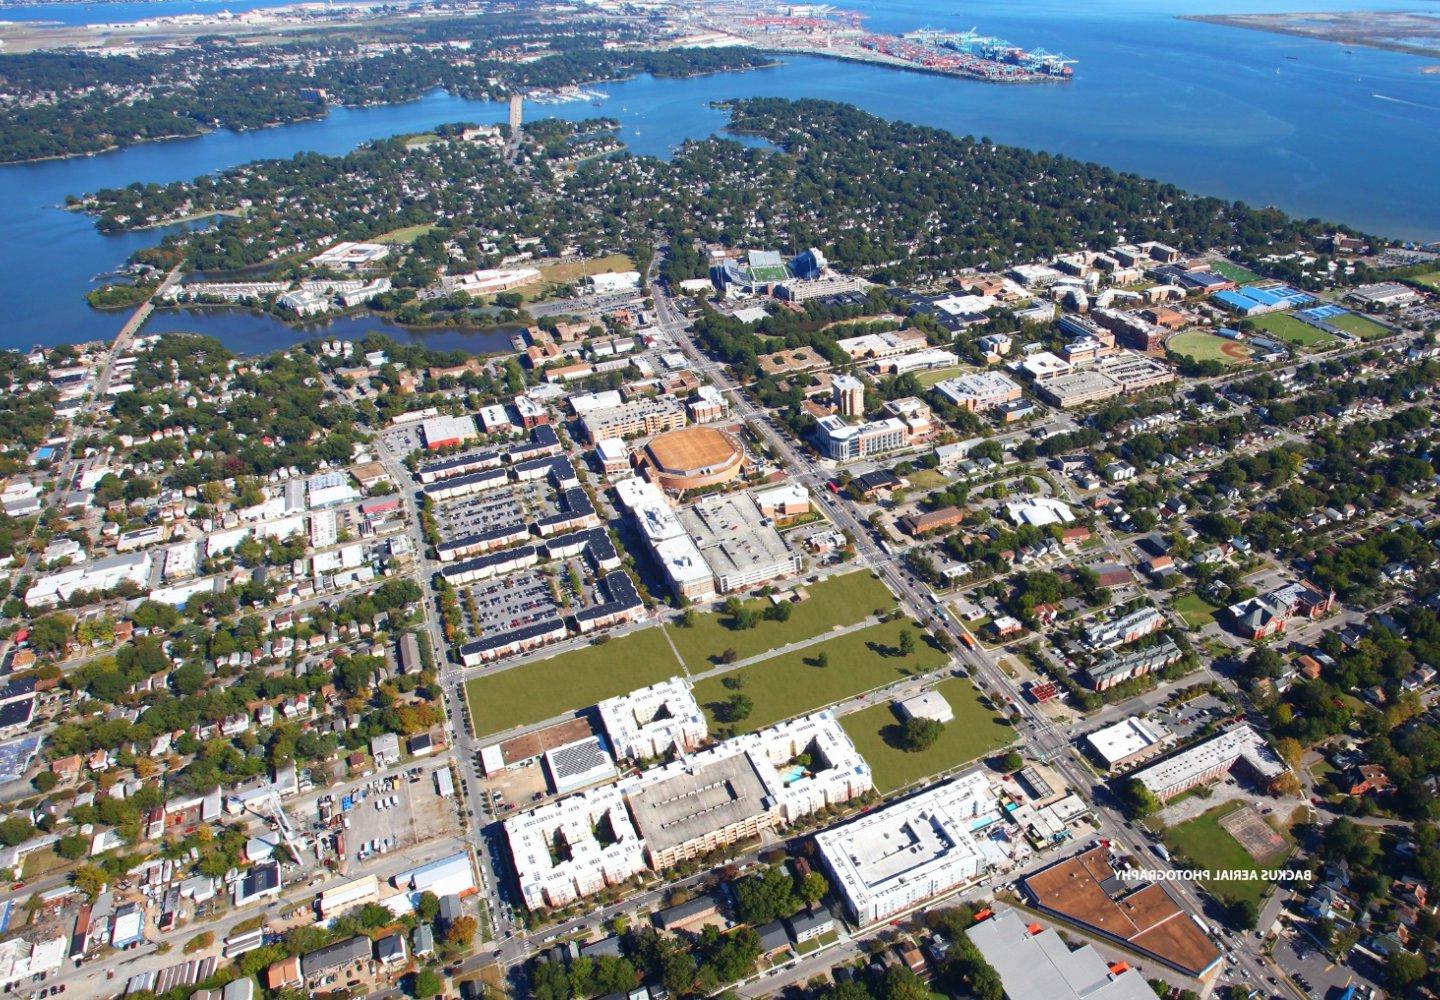 large size drone photo of ODU campus